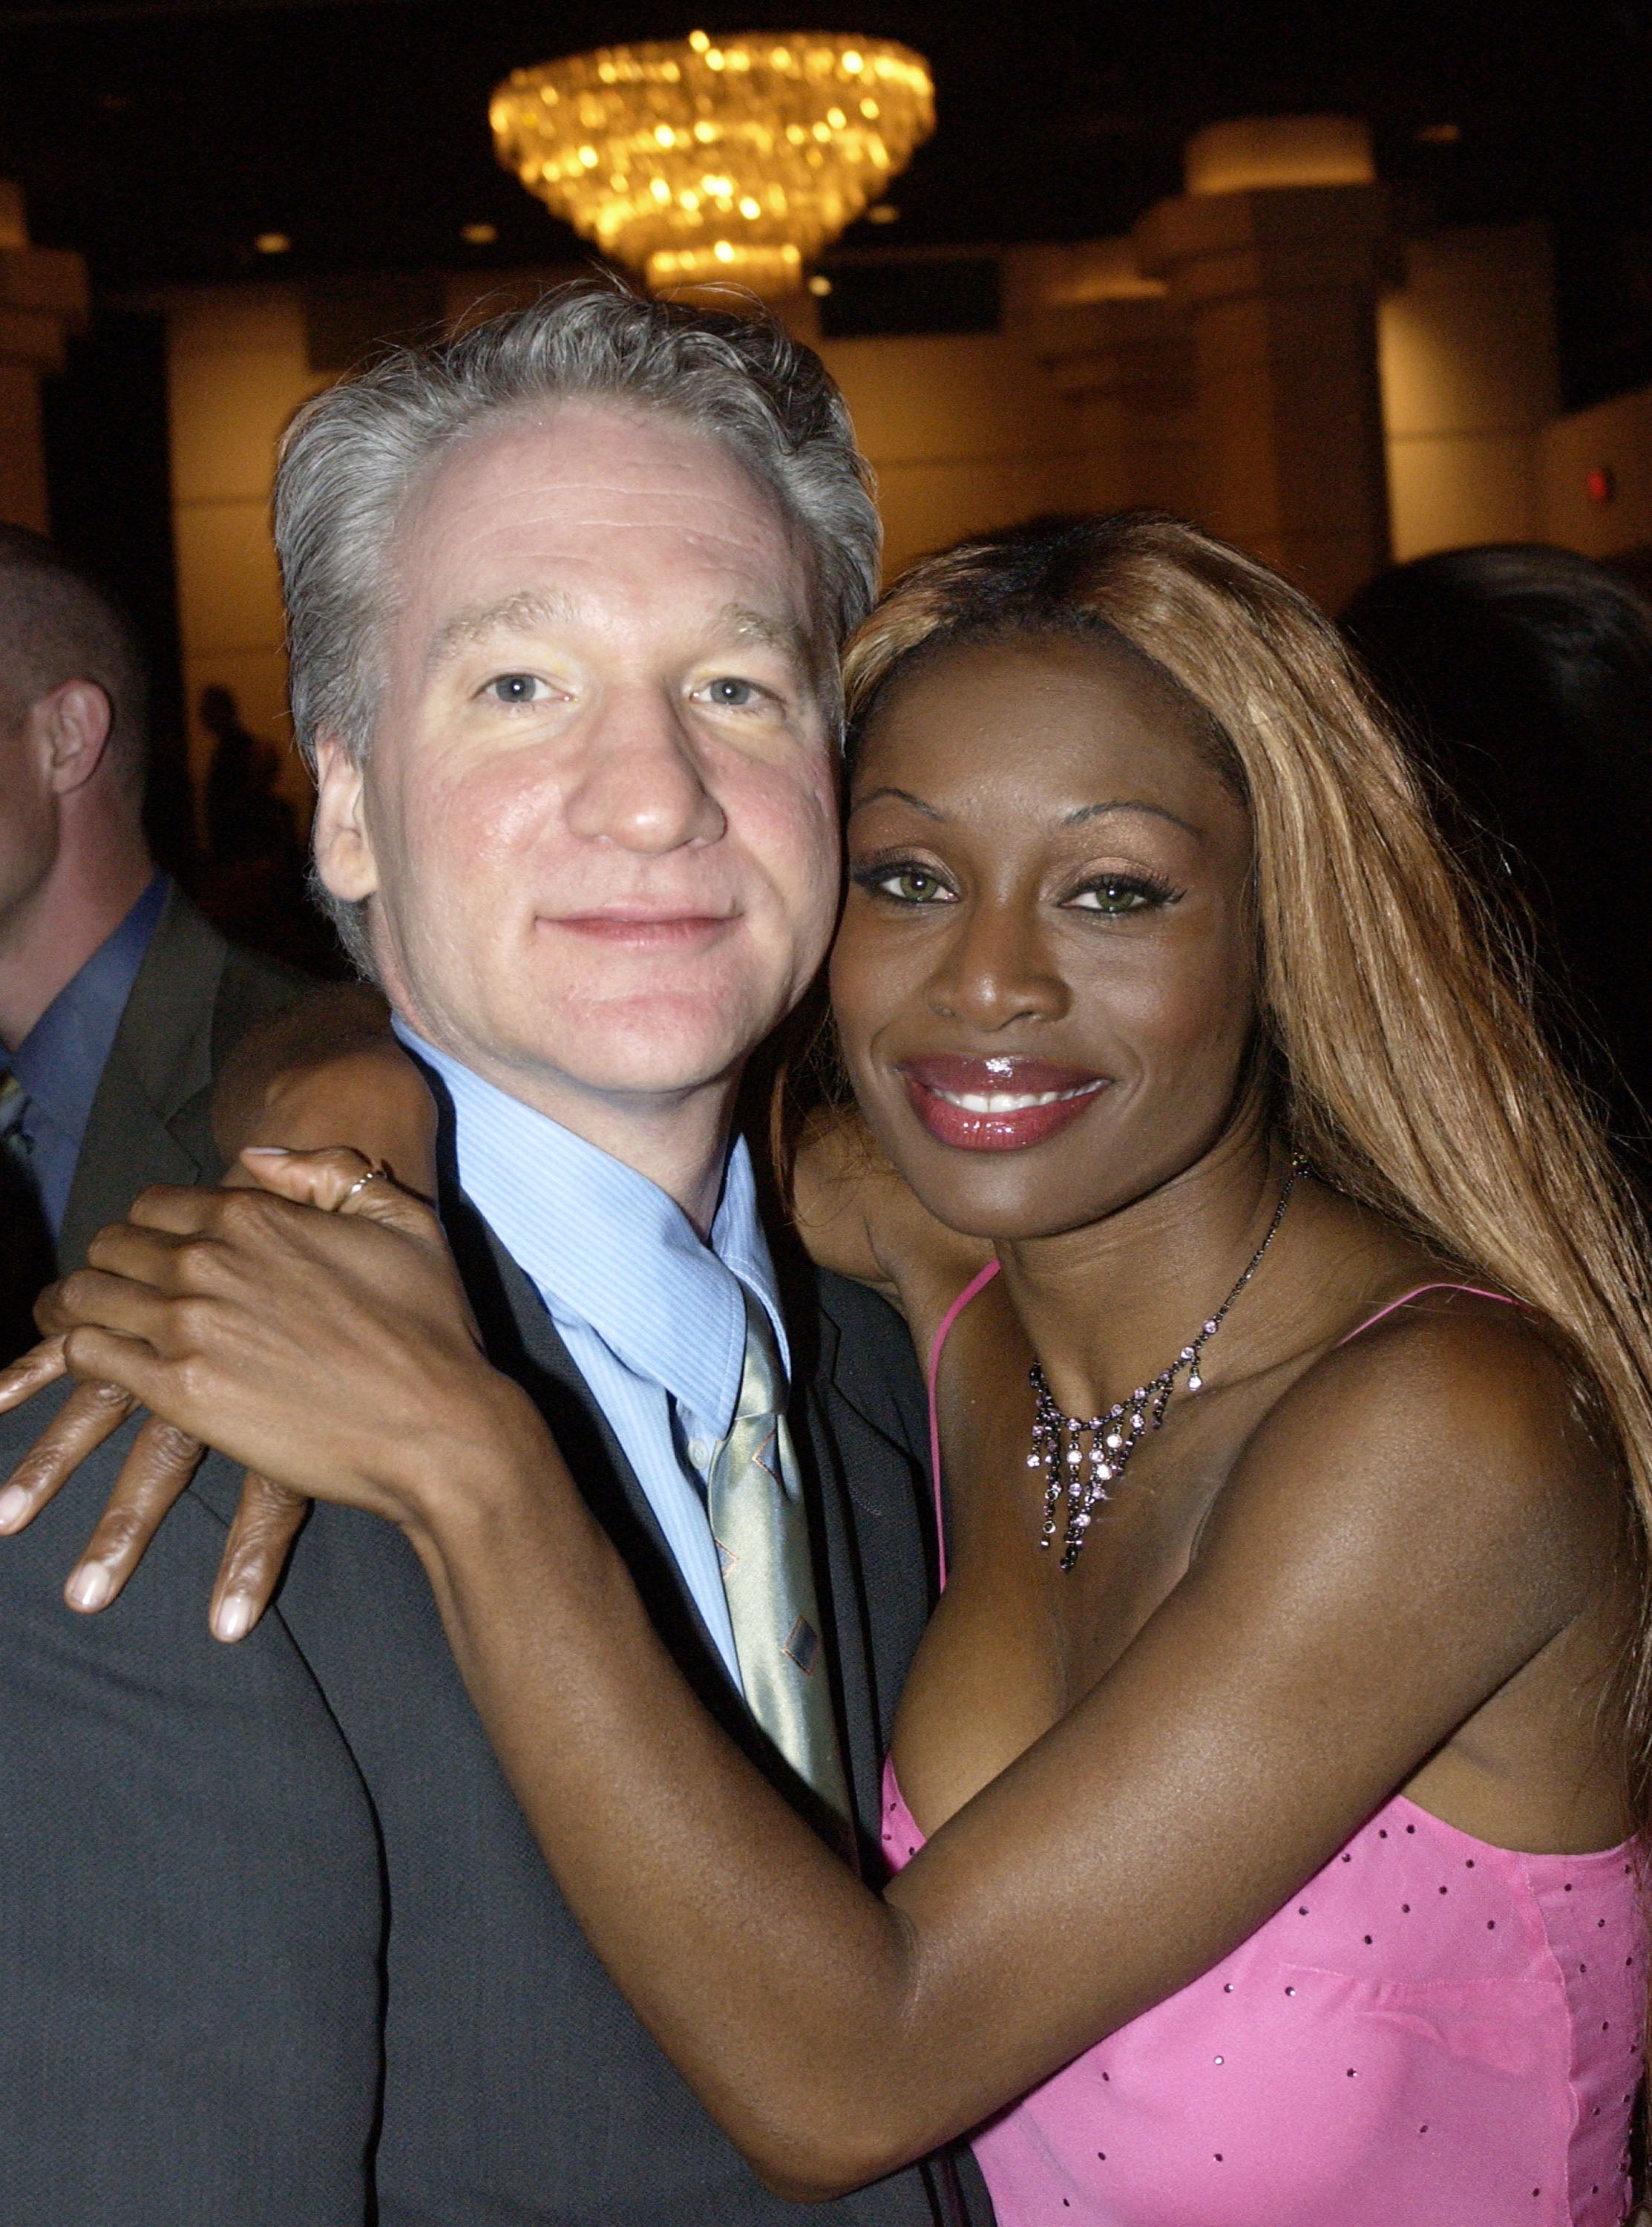 Ex-Girlfriend Hints That This Isn't Bill Maher's First Rodeo With N-Word
